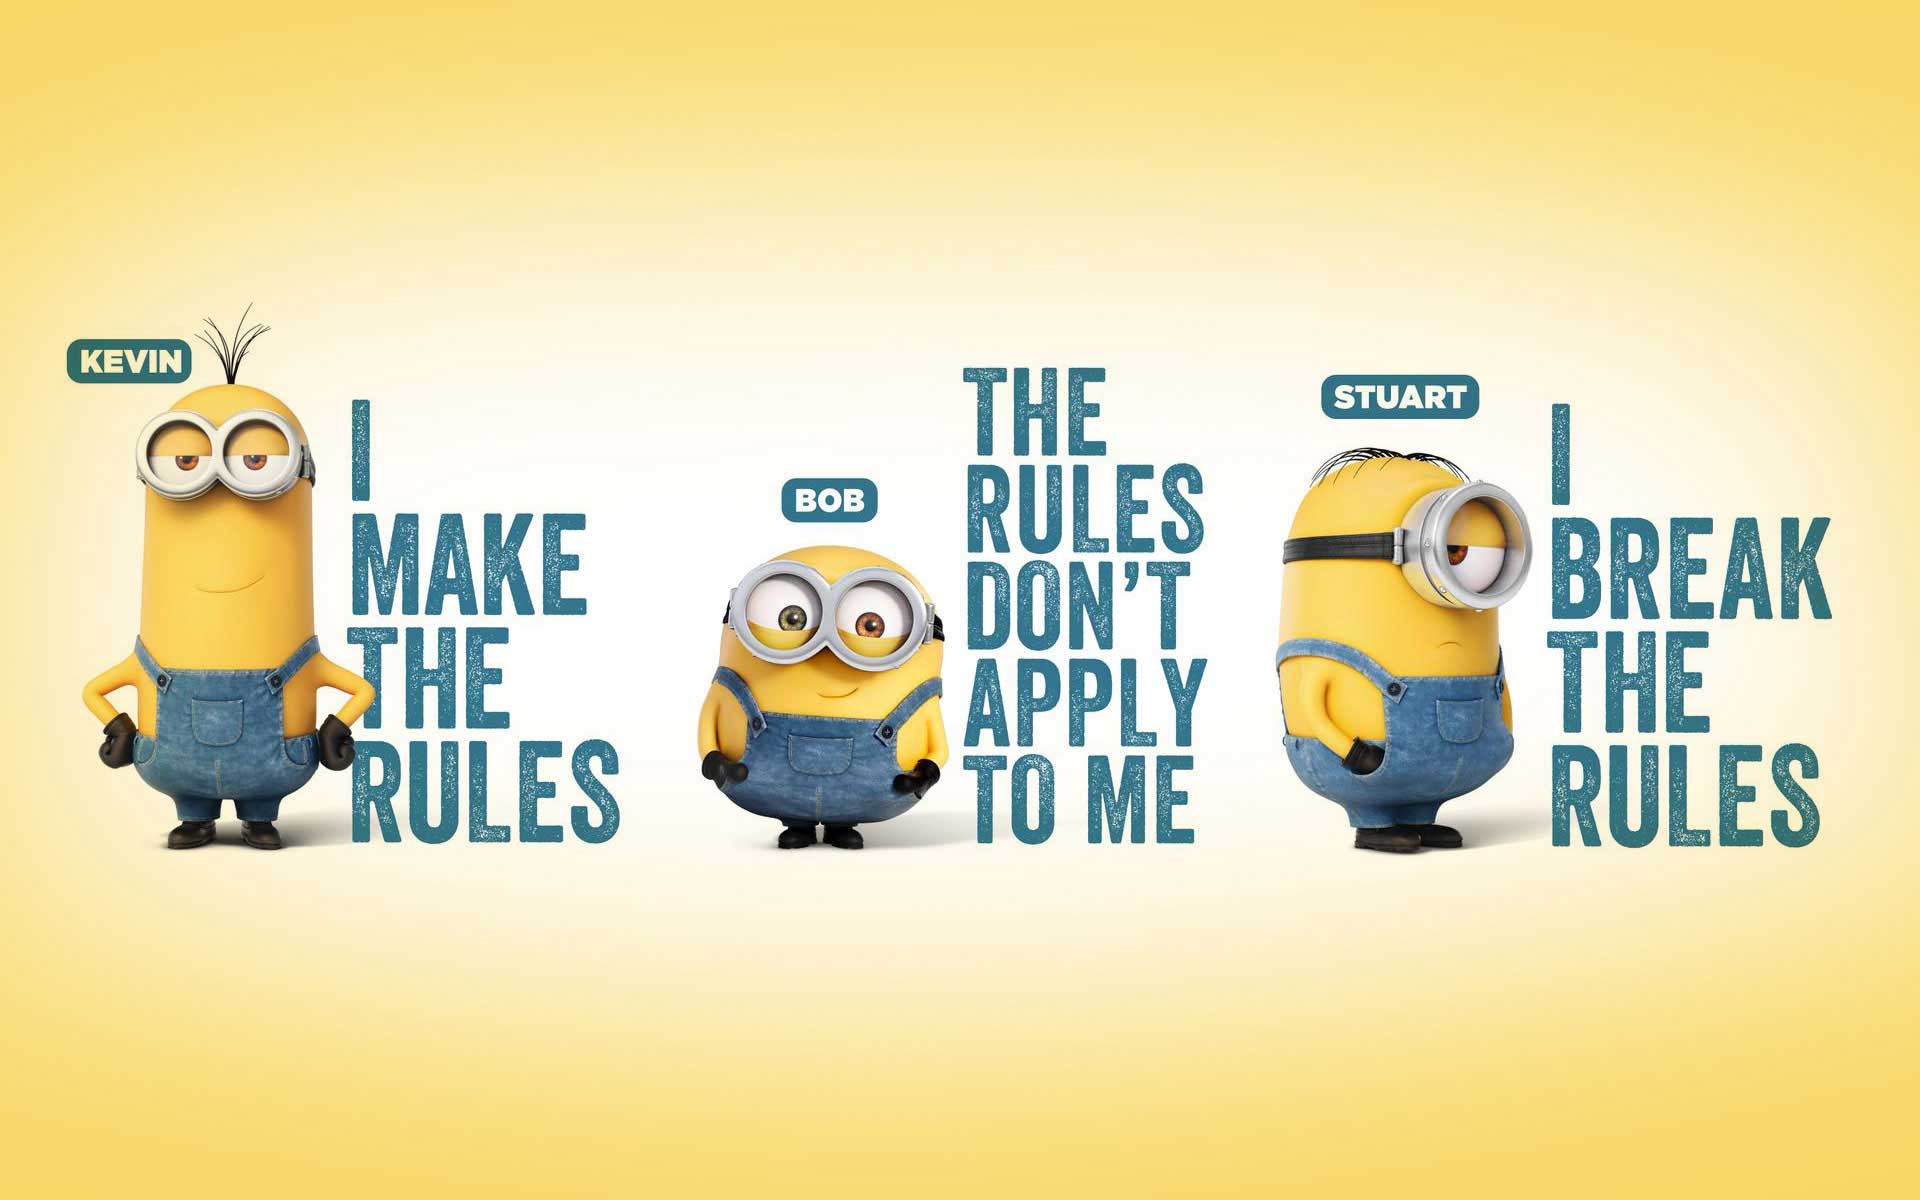 25 Minions Wallpapers that Will amuse You Every Day!